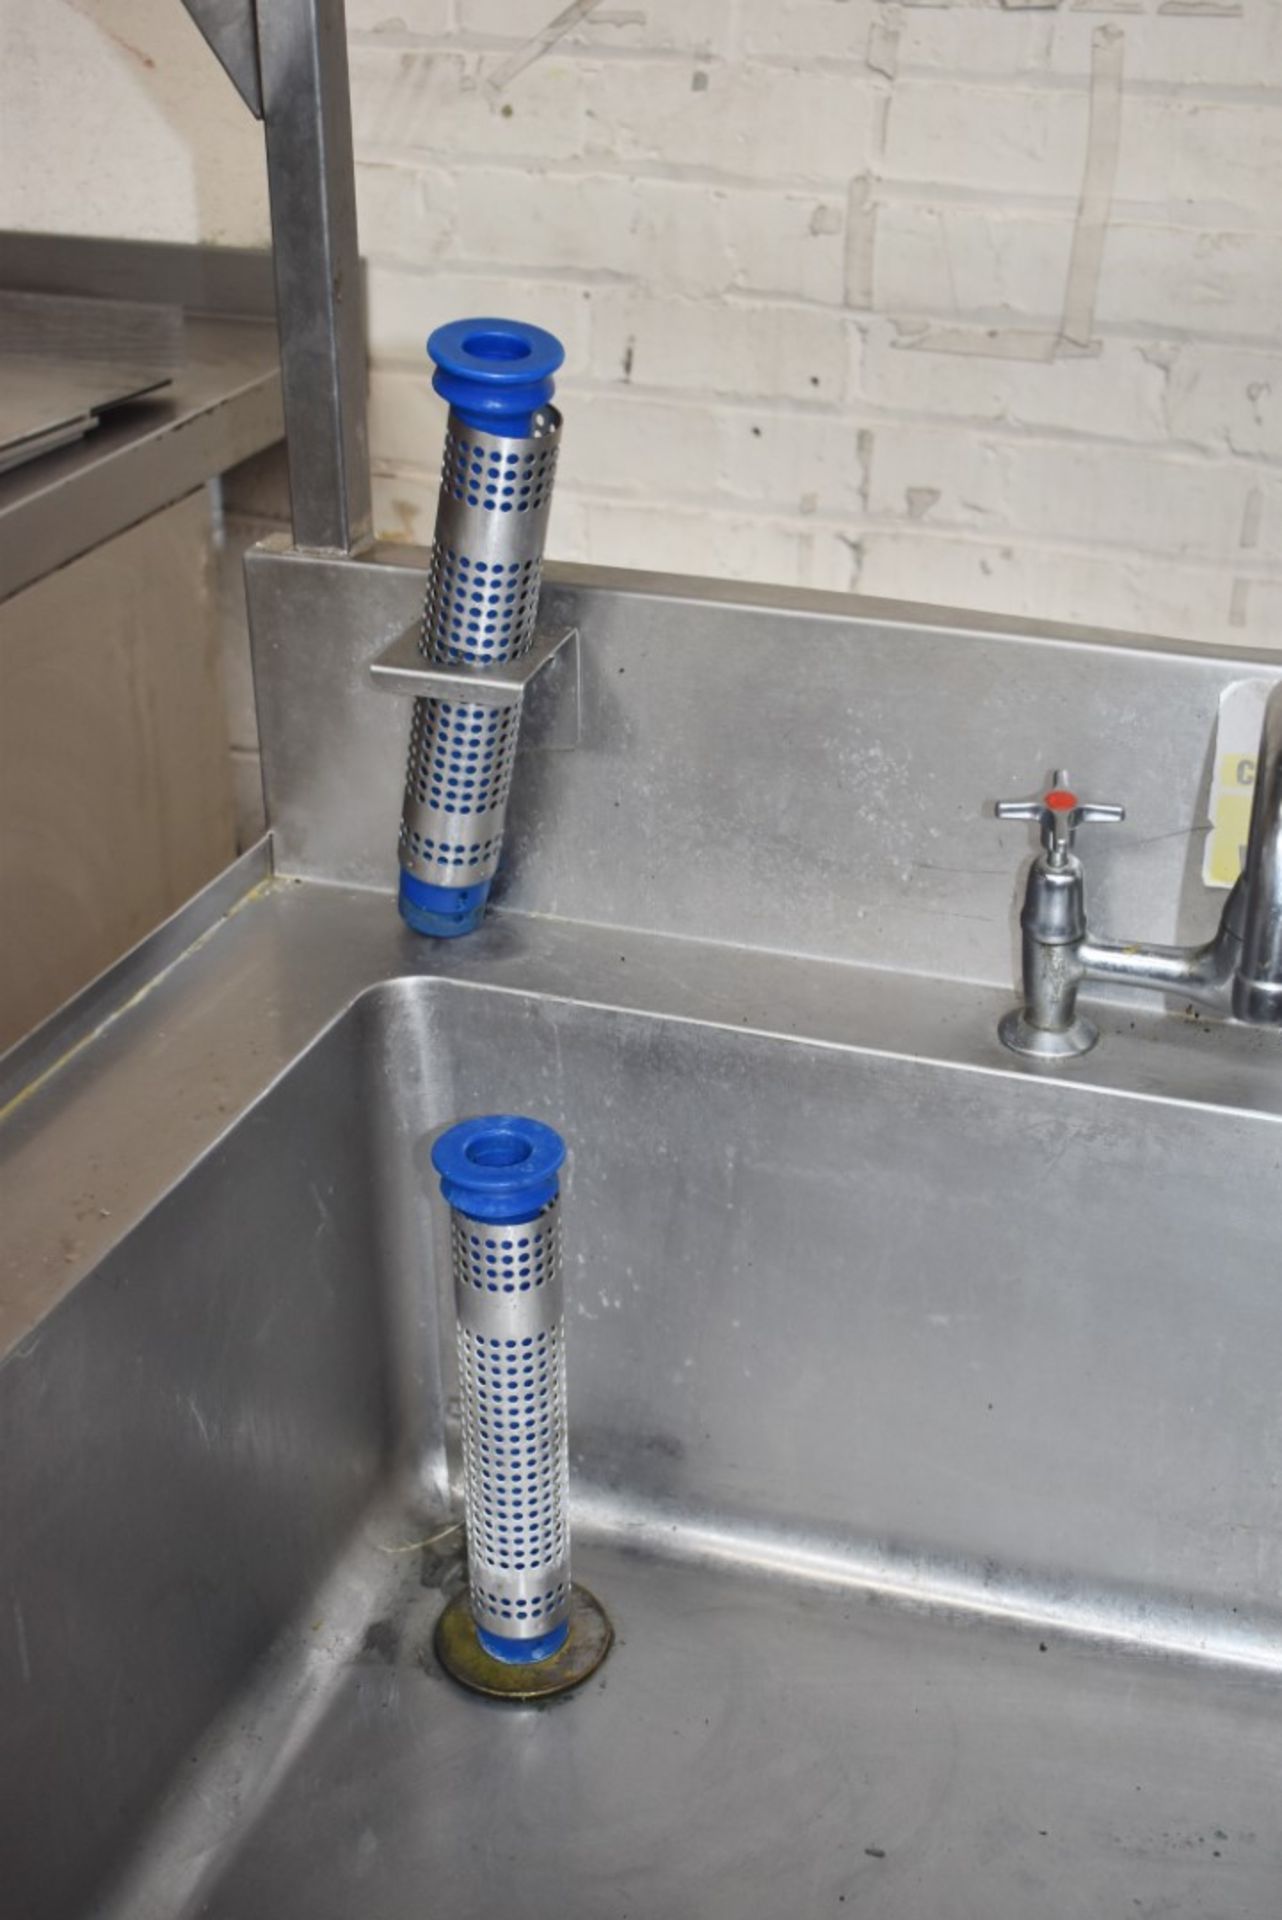 1 x Stainless Steel Commercial Wash Basin With Large Basin, Mixer Tap, Detergent Dispensers and Over - Image 2 of 9